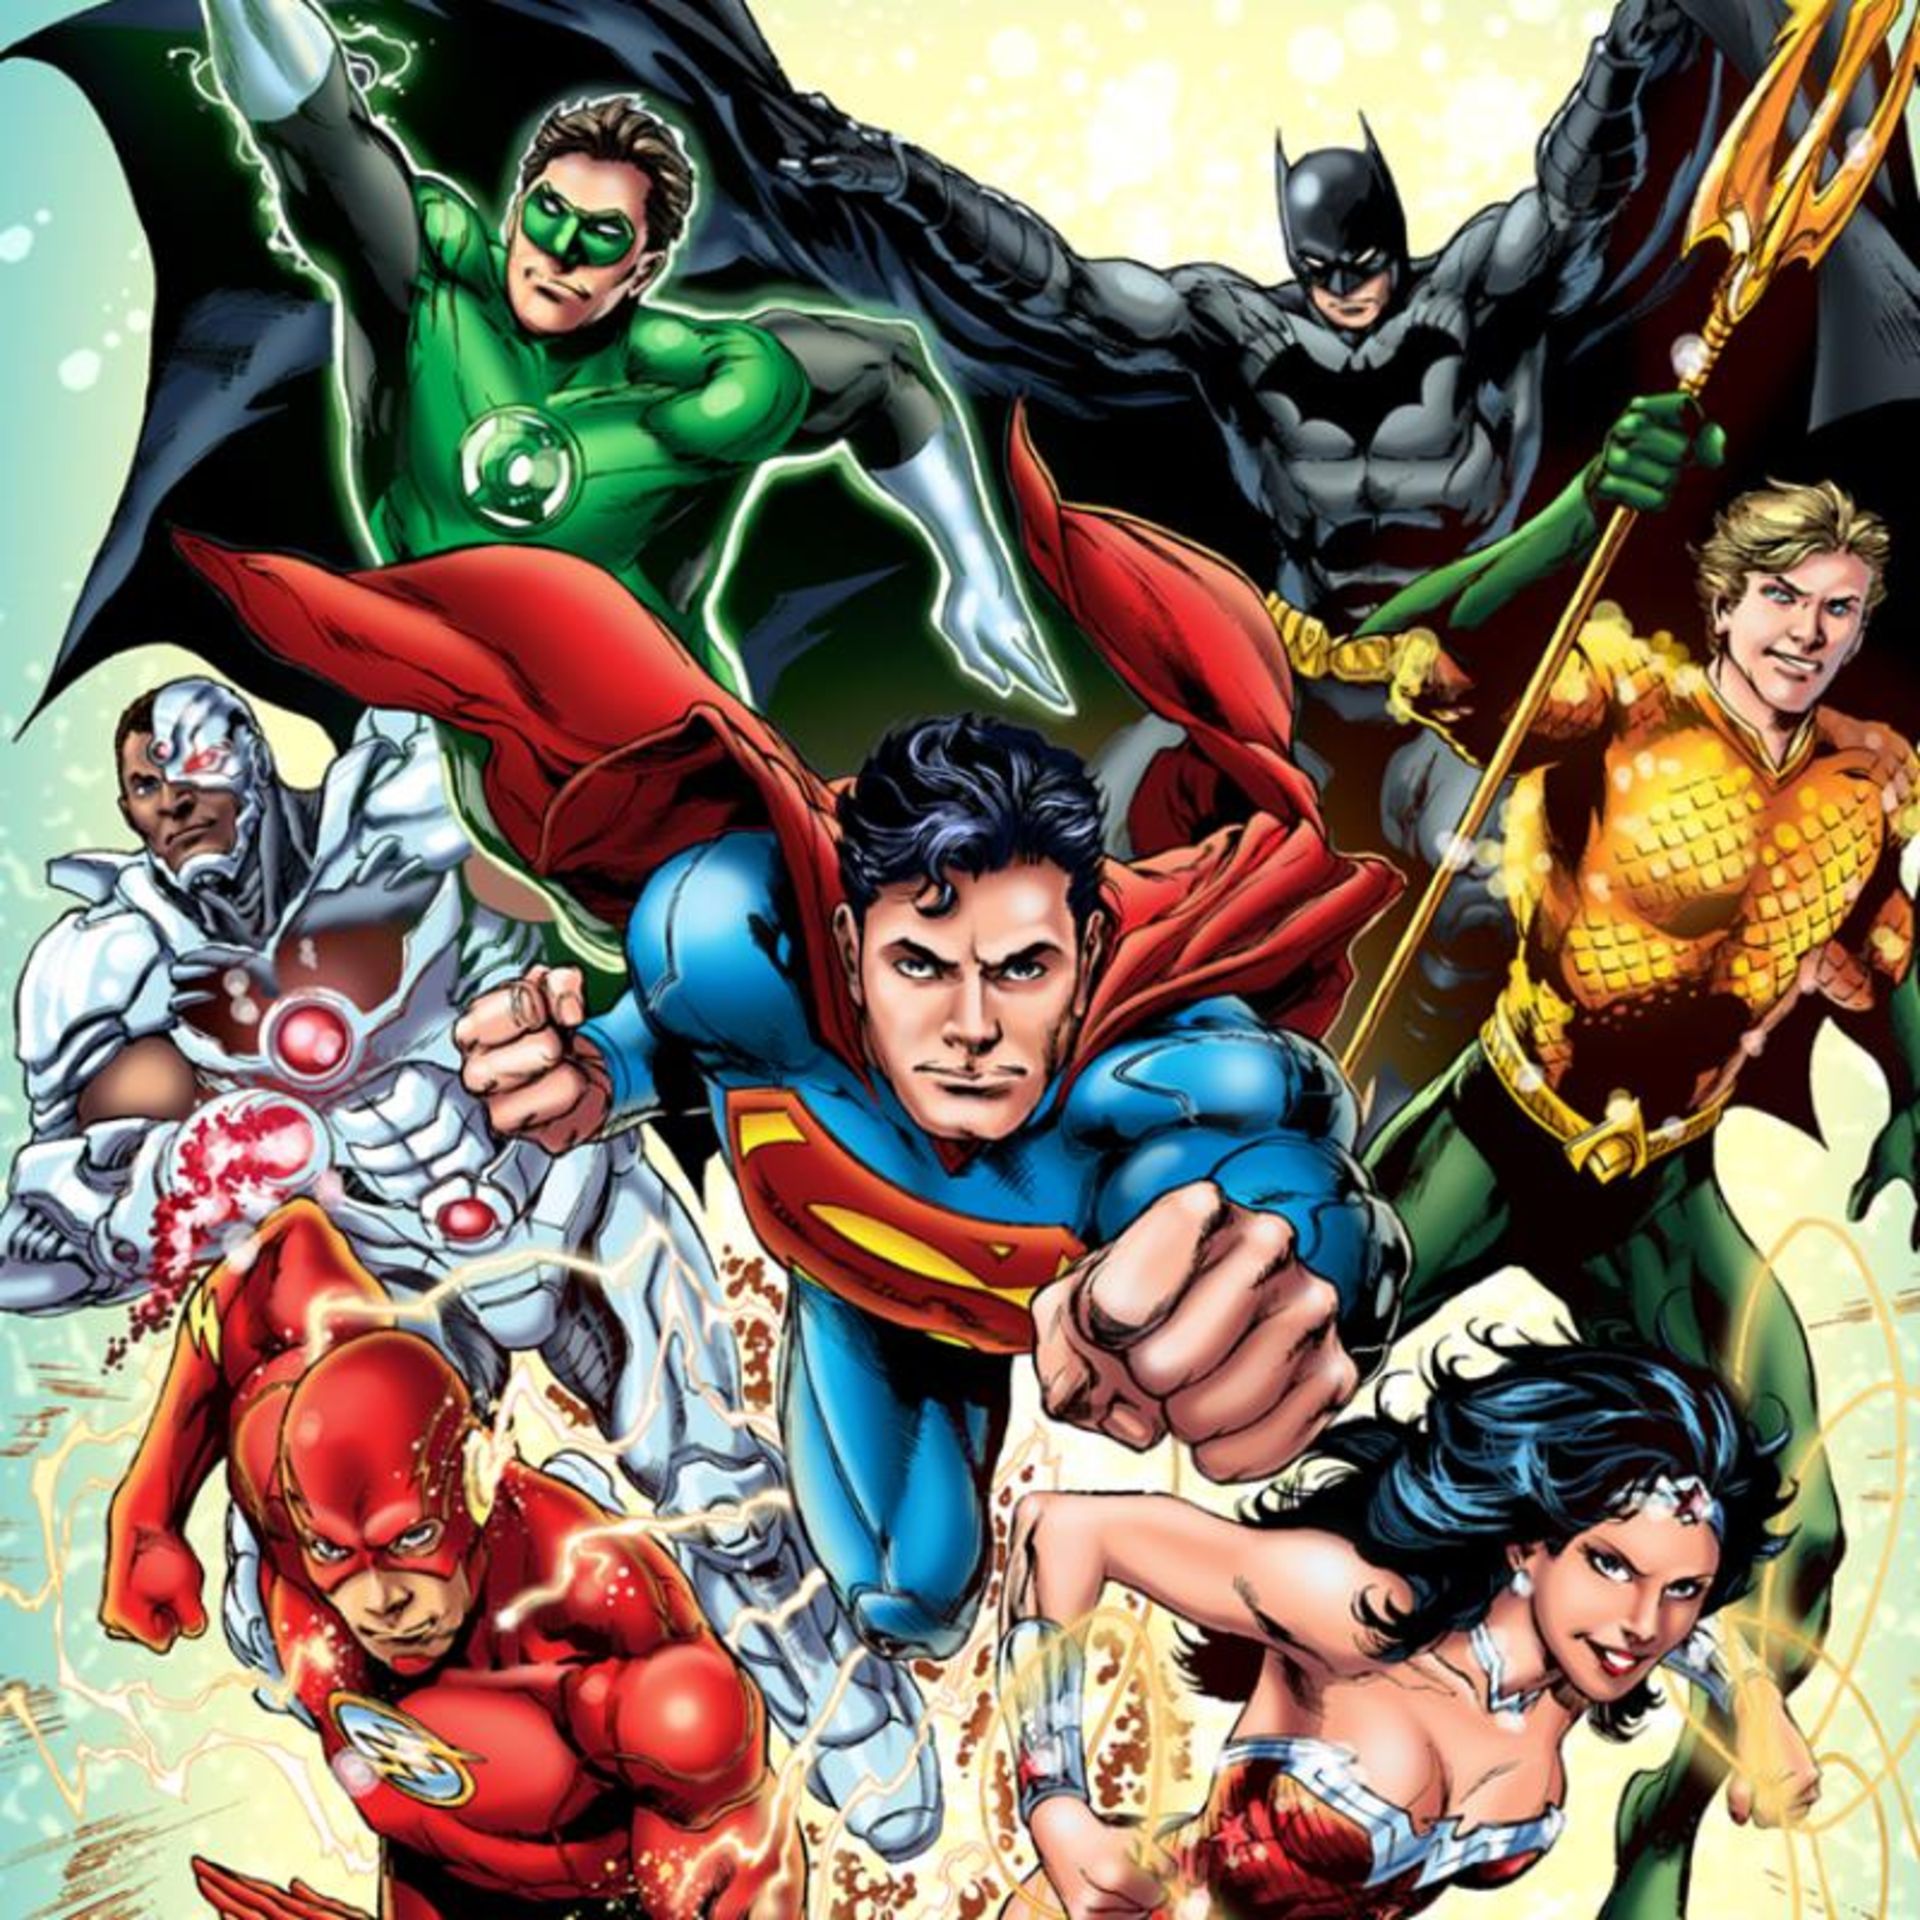 Justice League 2 by DC Comics - Image 2 of 2